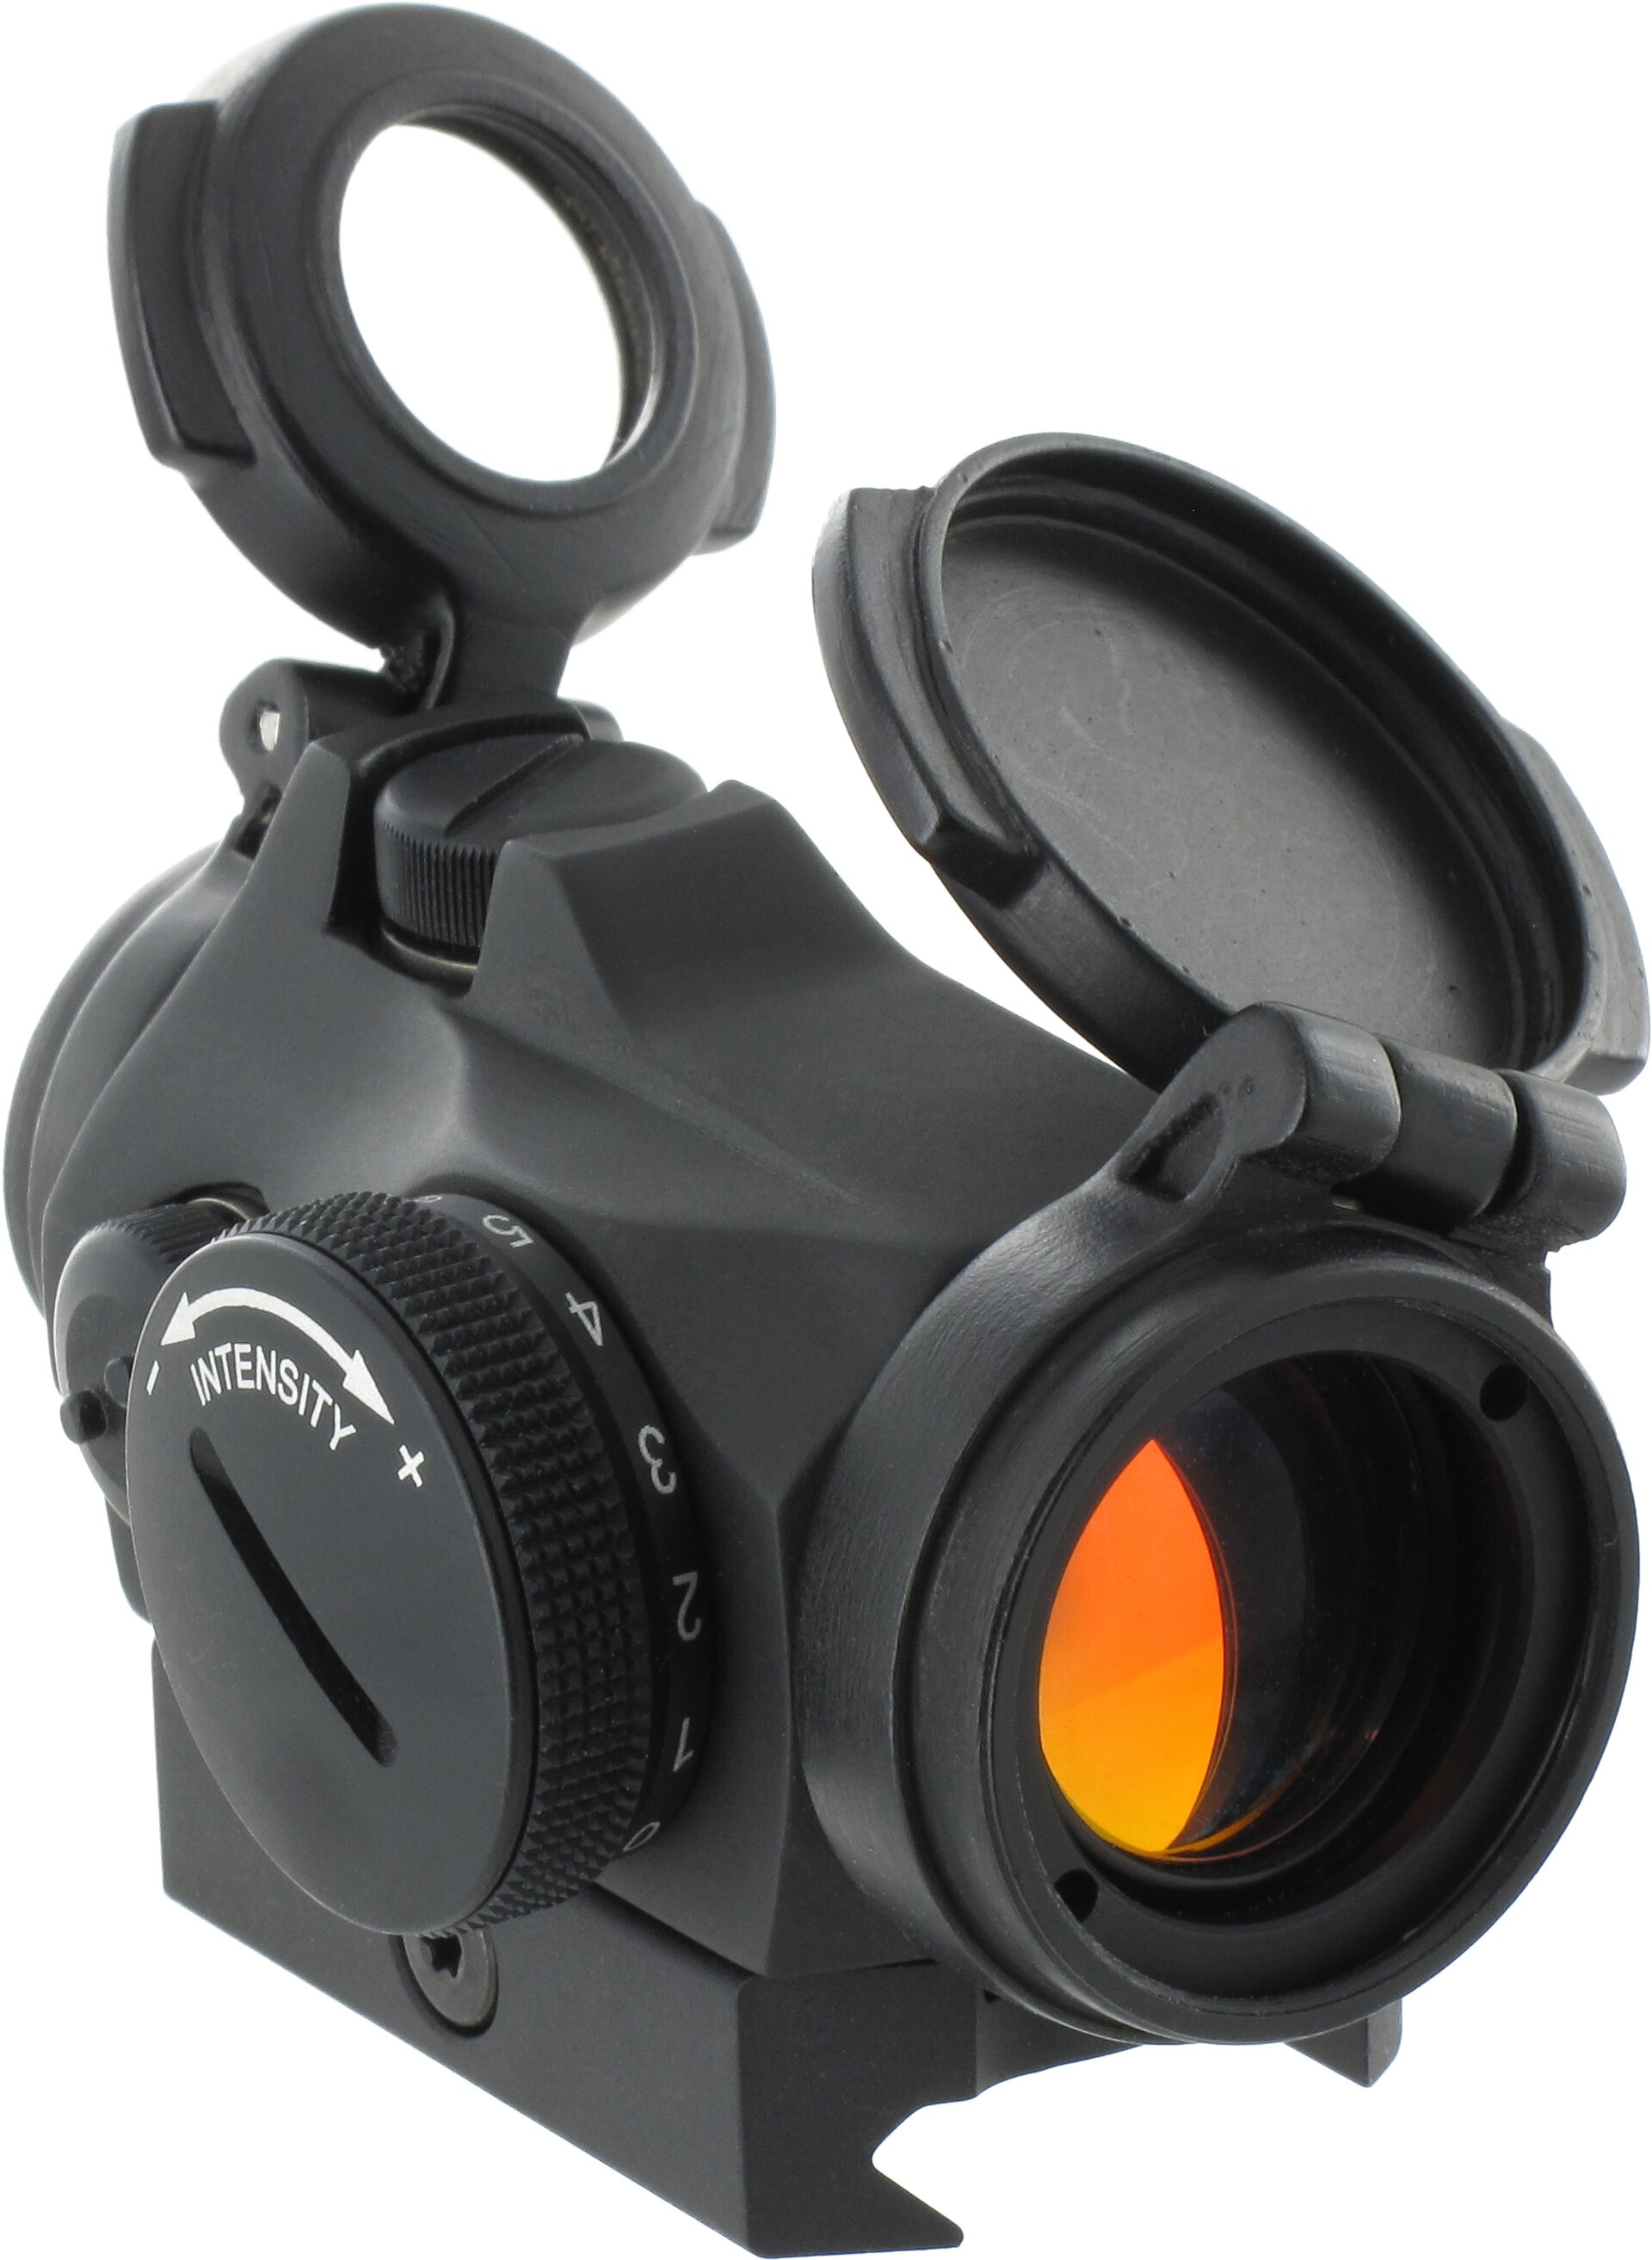 Aimpoint Micro H-2 Red Dot sight With Weaver Base レッドドットサイト  日本語